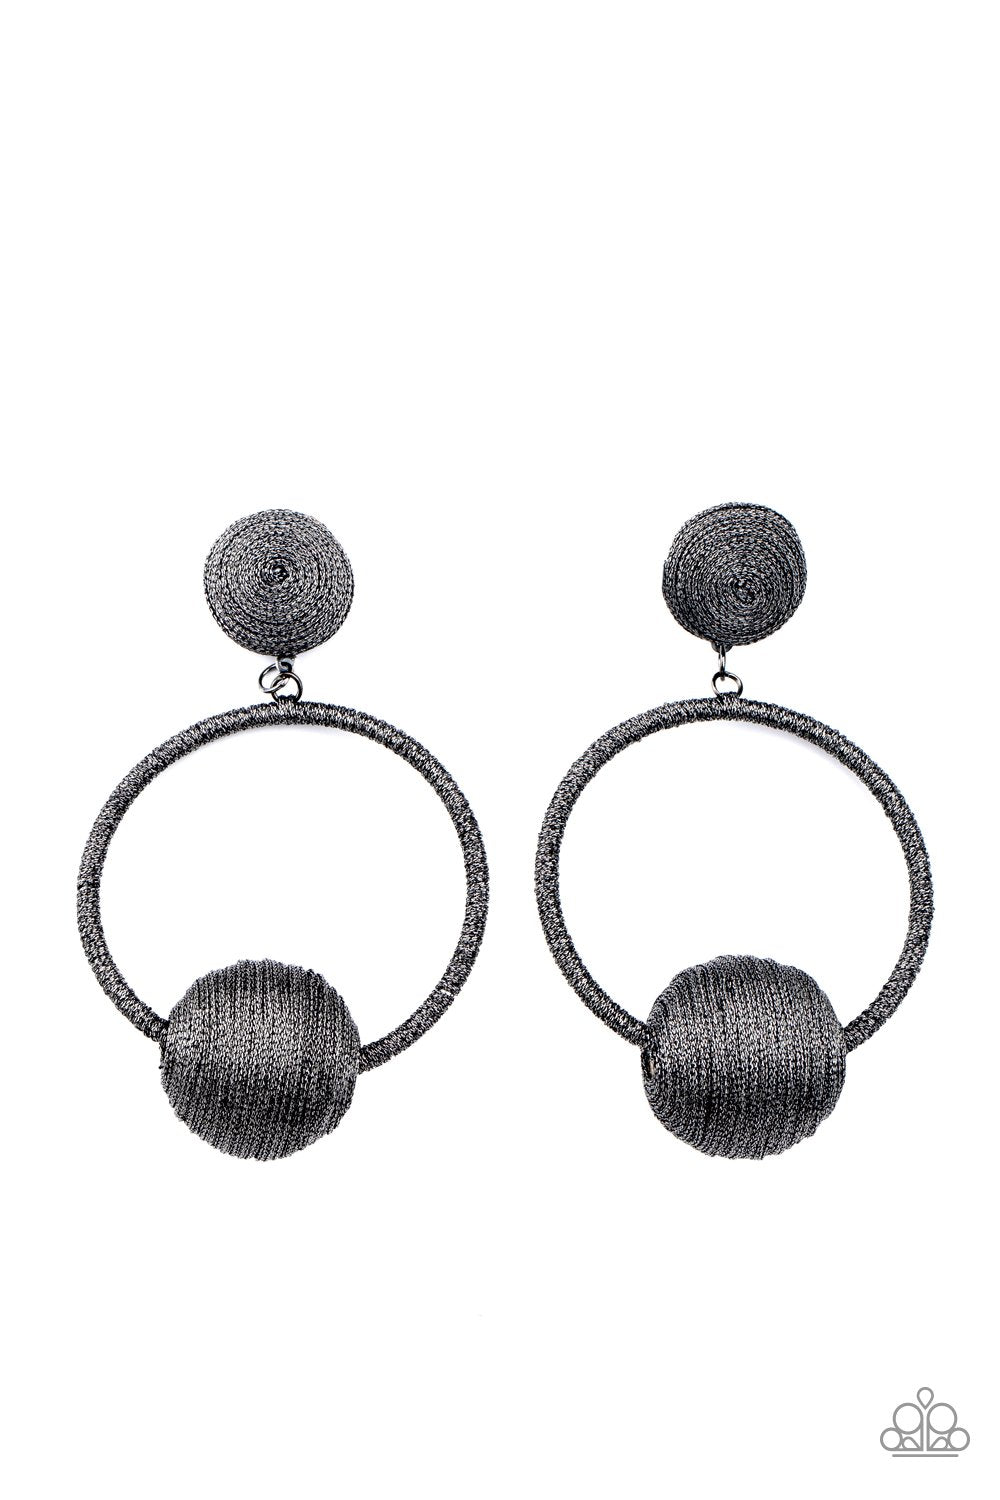 Social Sphere Black Earrings - Paparazzi Accessories LOTP Exclusive April 2021- lightbox - CarasShop.com - $5 Jewelry by Cara Jewels